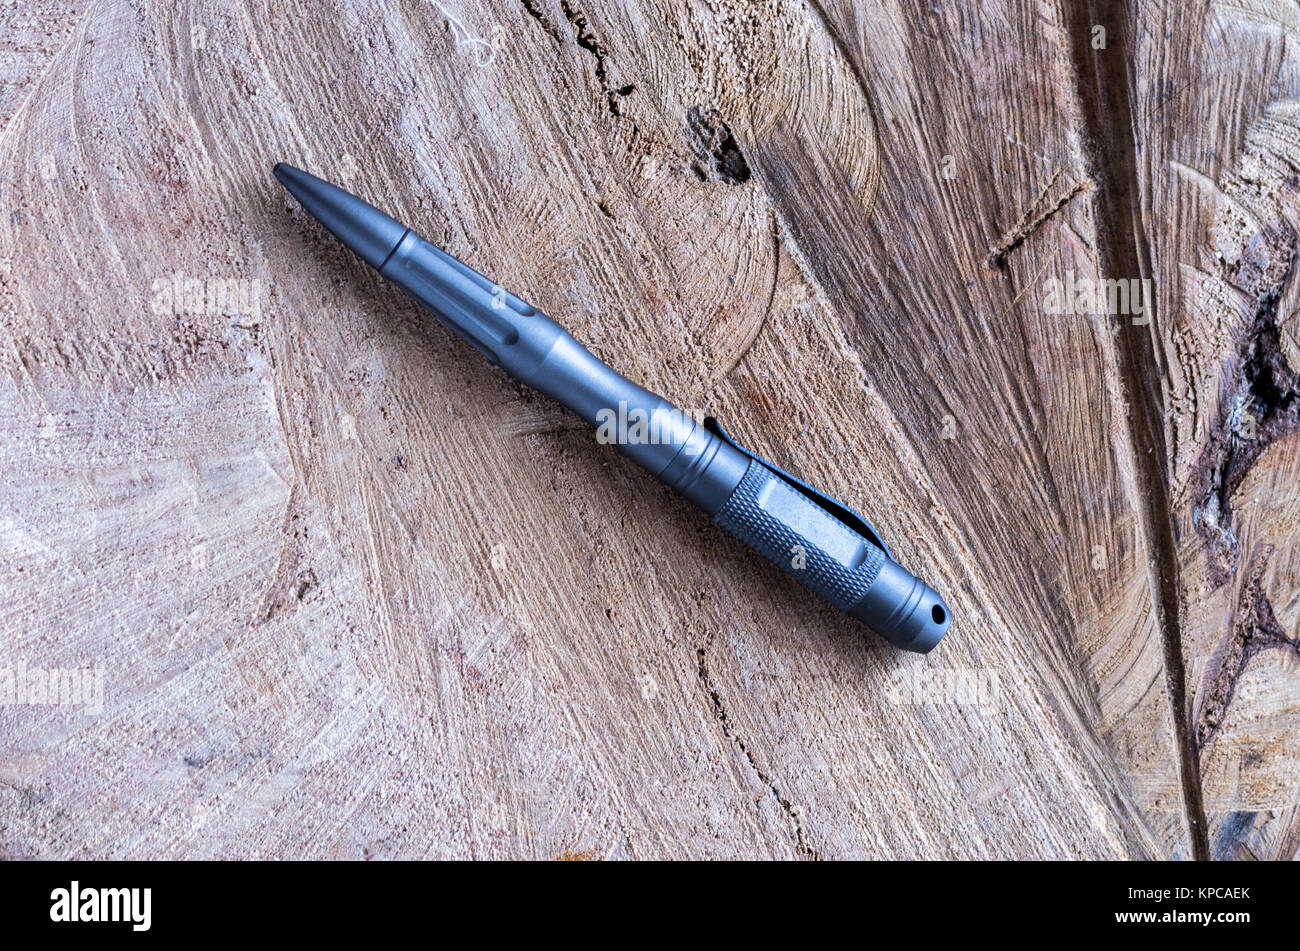 Gray metal handle for self-defense. Ballpoint pen made of metal. Wooden background from oak. Stock Photo